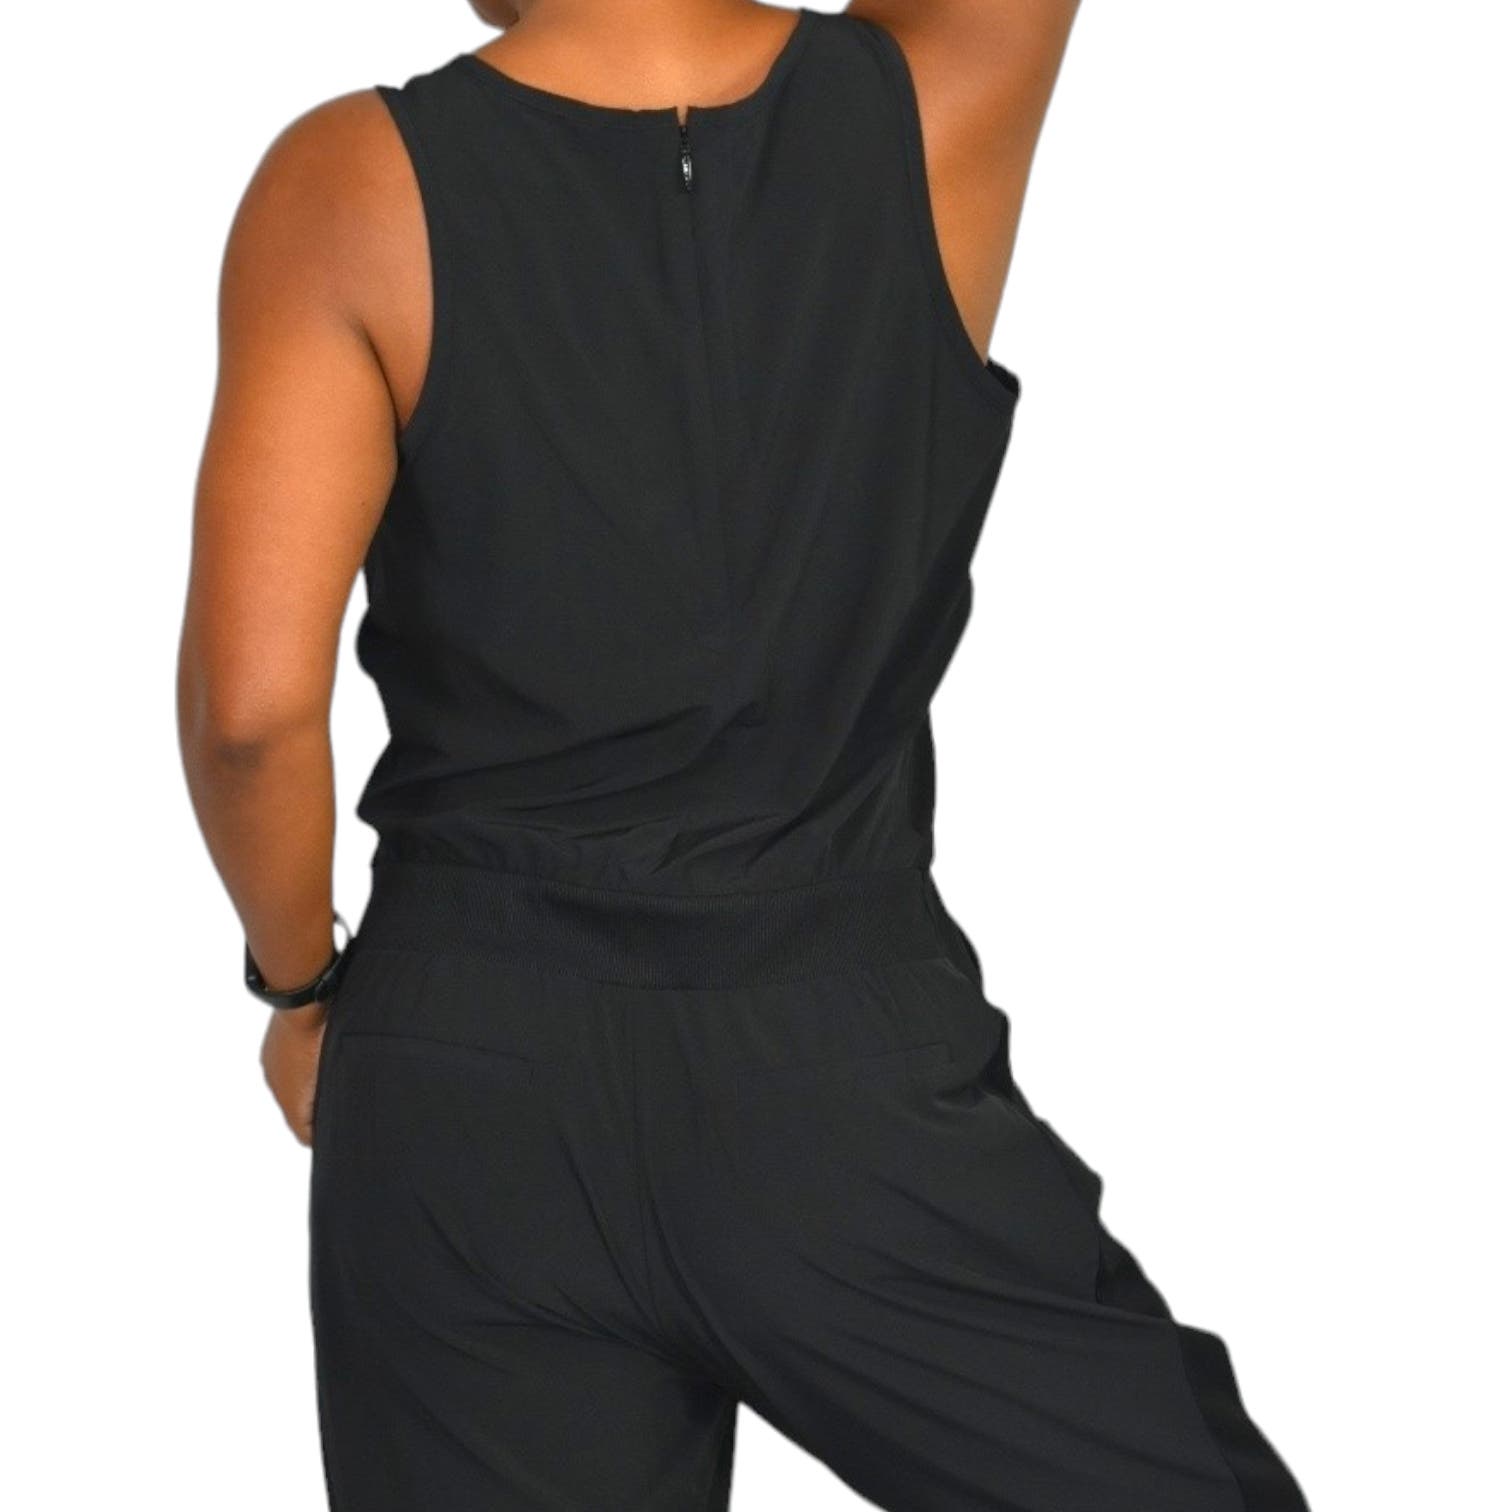 Athleta Brooklyn Jumpsuit Black Silky Pantsuit Tapered Casual Sleeveless Pockets Size 10